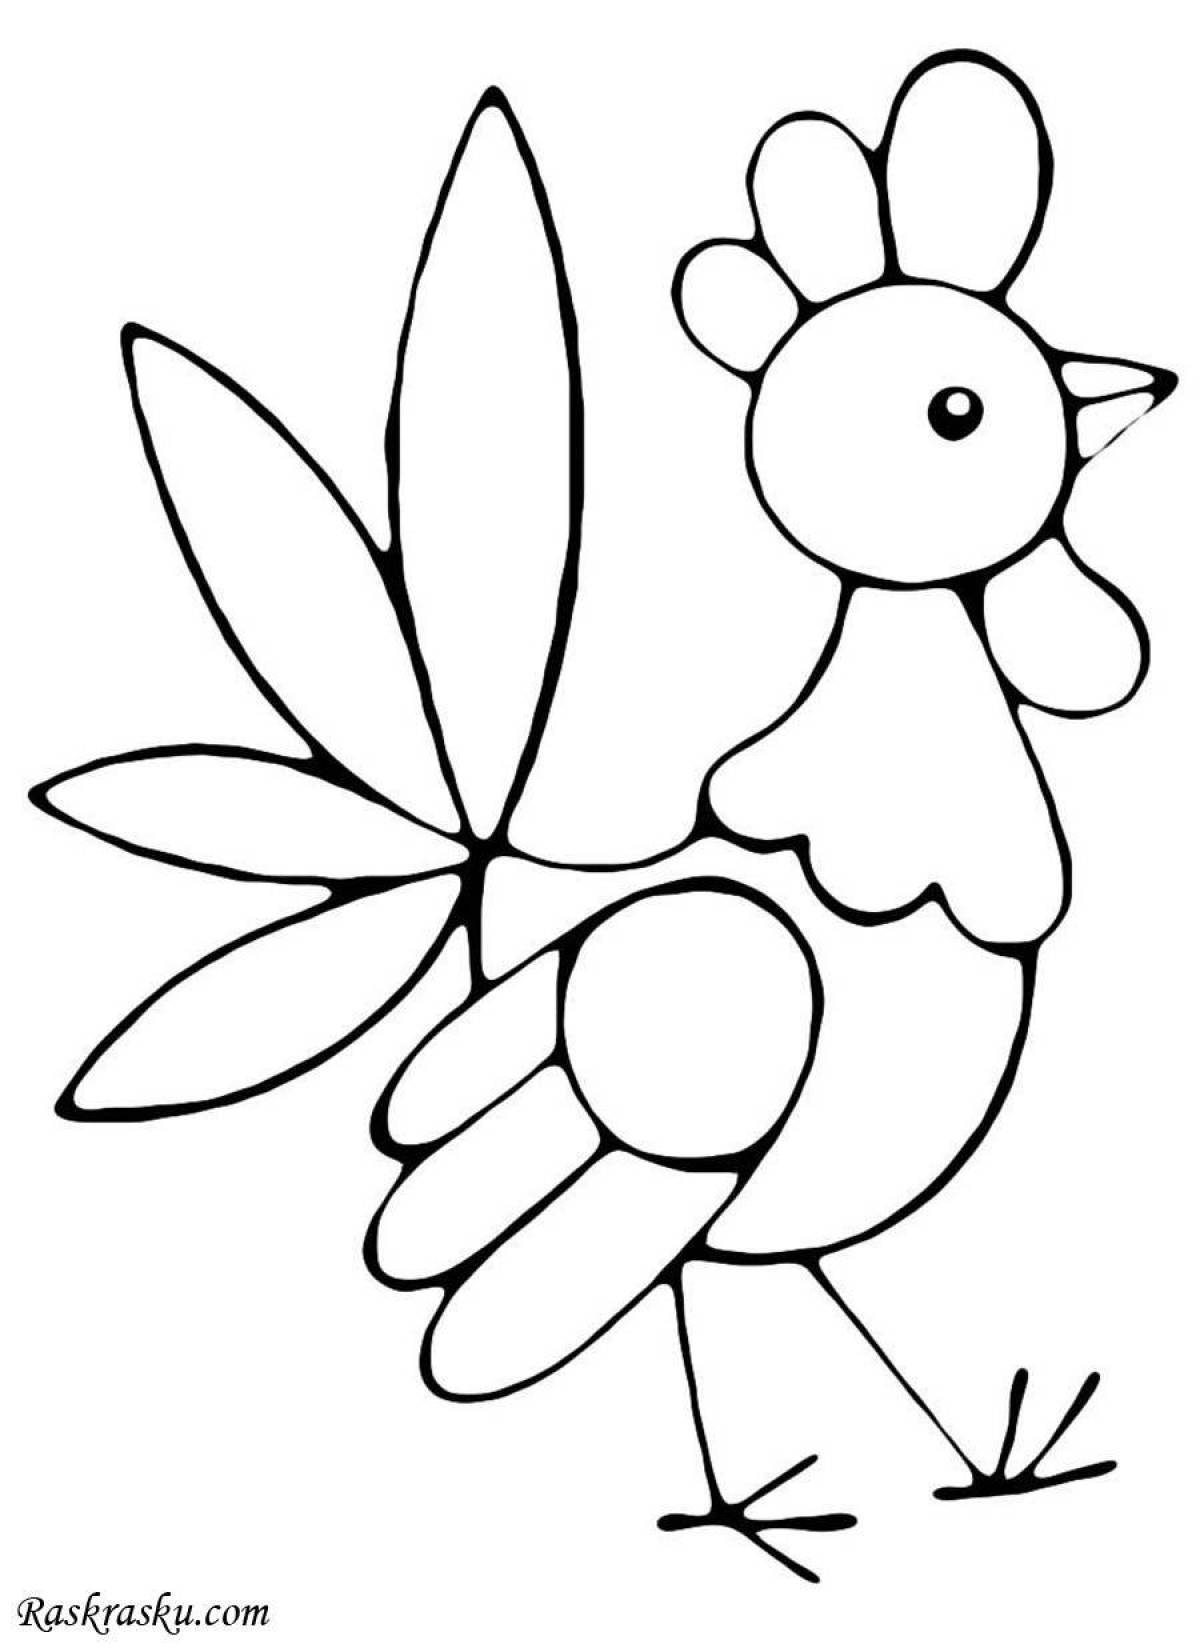 Color-mad coloring page for the little ones